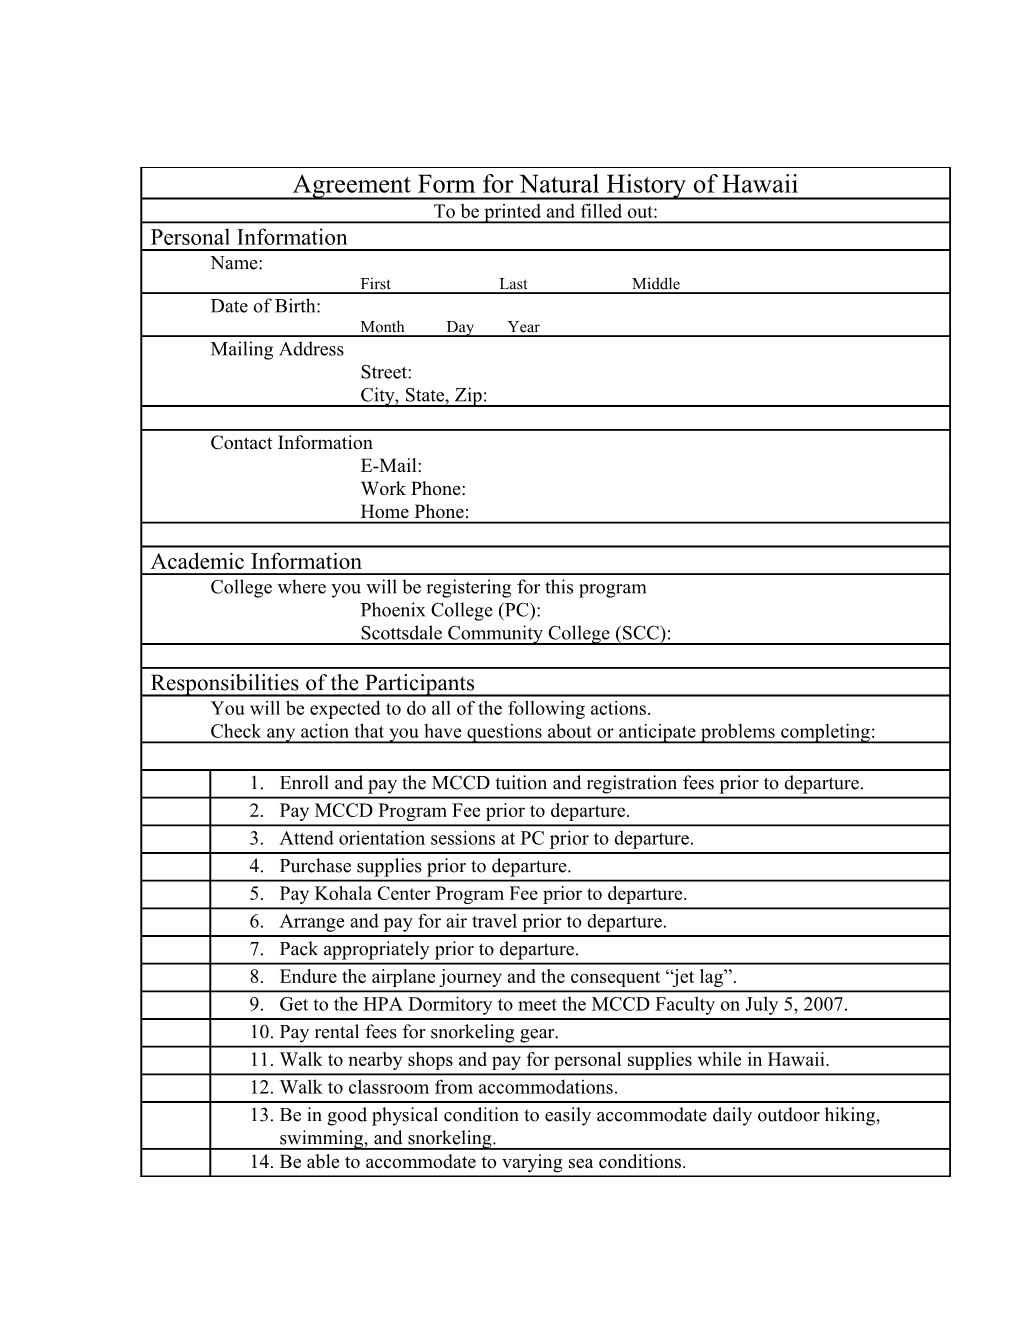 Application Form for Natural History of Hawaii